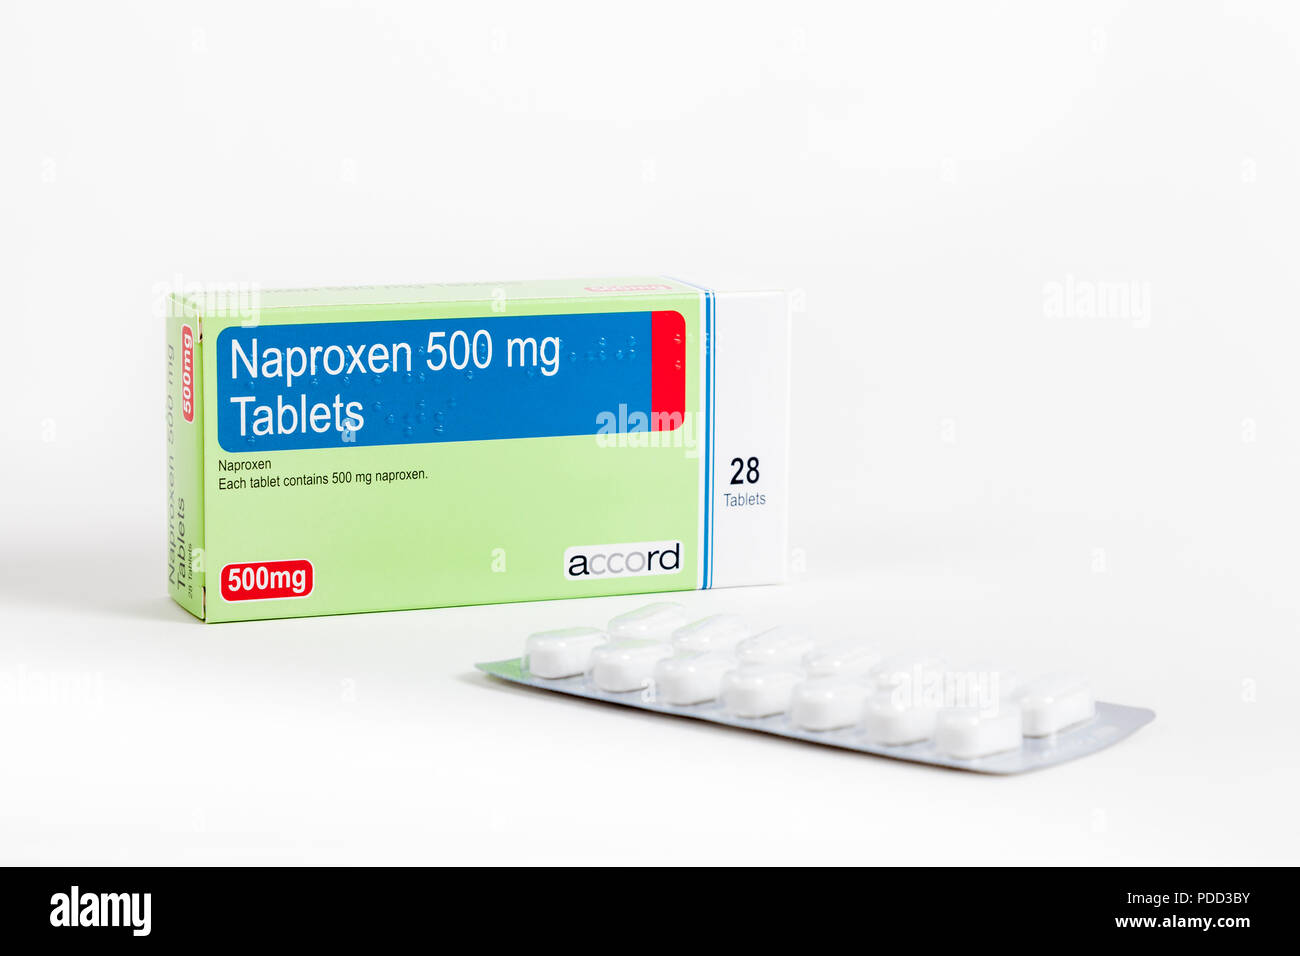 Box of 28 Naproxen 500mg tablets made by Accord. A non-steroidal anti-inflammatory (NSAID) drug for pain relief and reducing inflammation Stock Photo